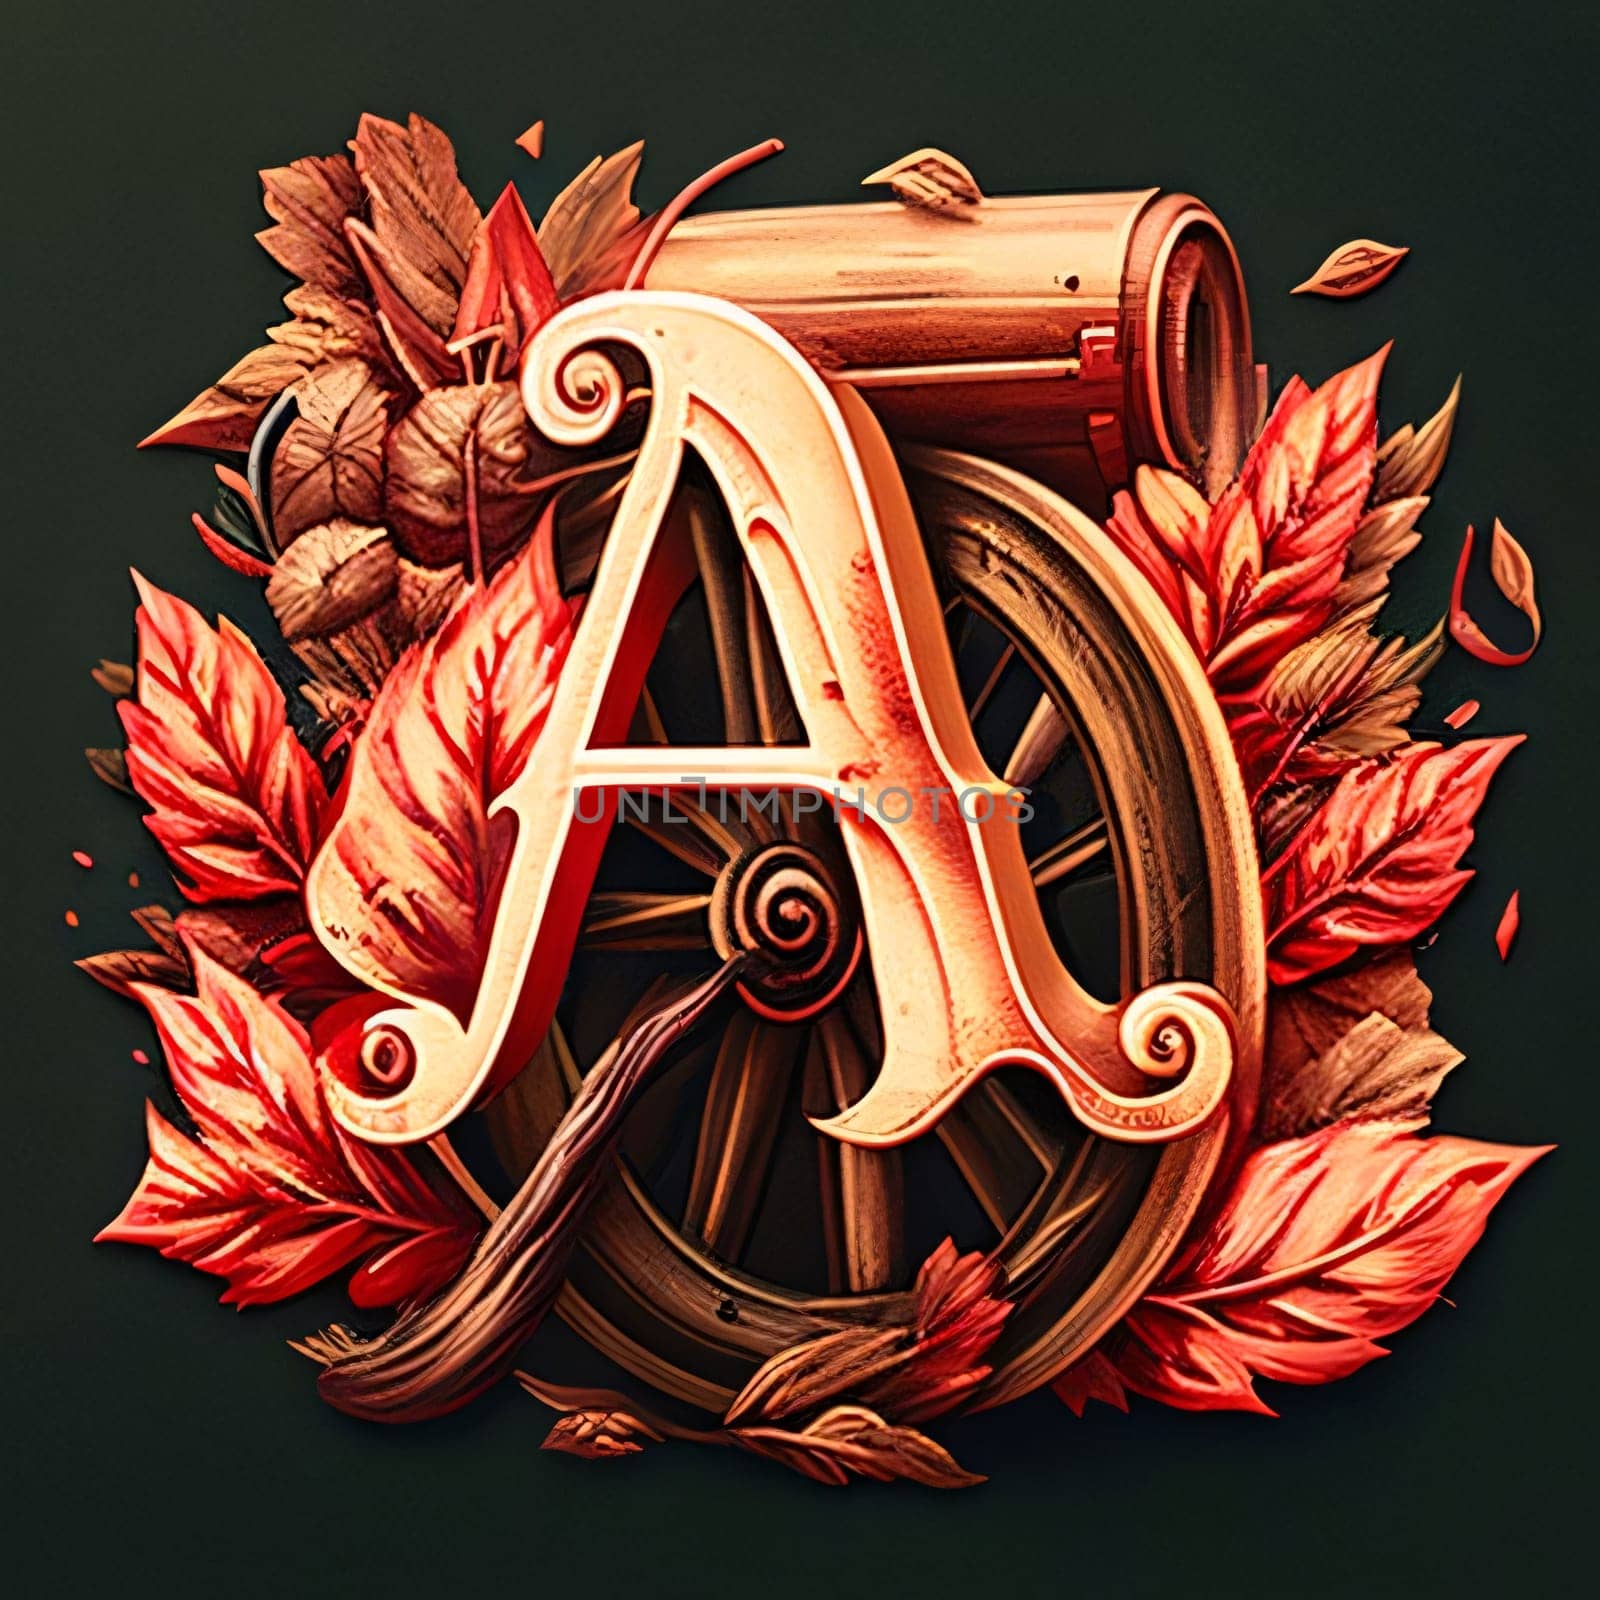 Graphic alphabet letters: Vintage letter A with autumn leaves on a dark background. 3d illustration